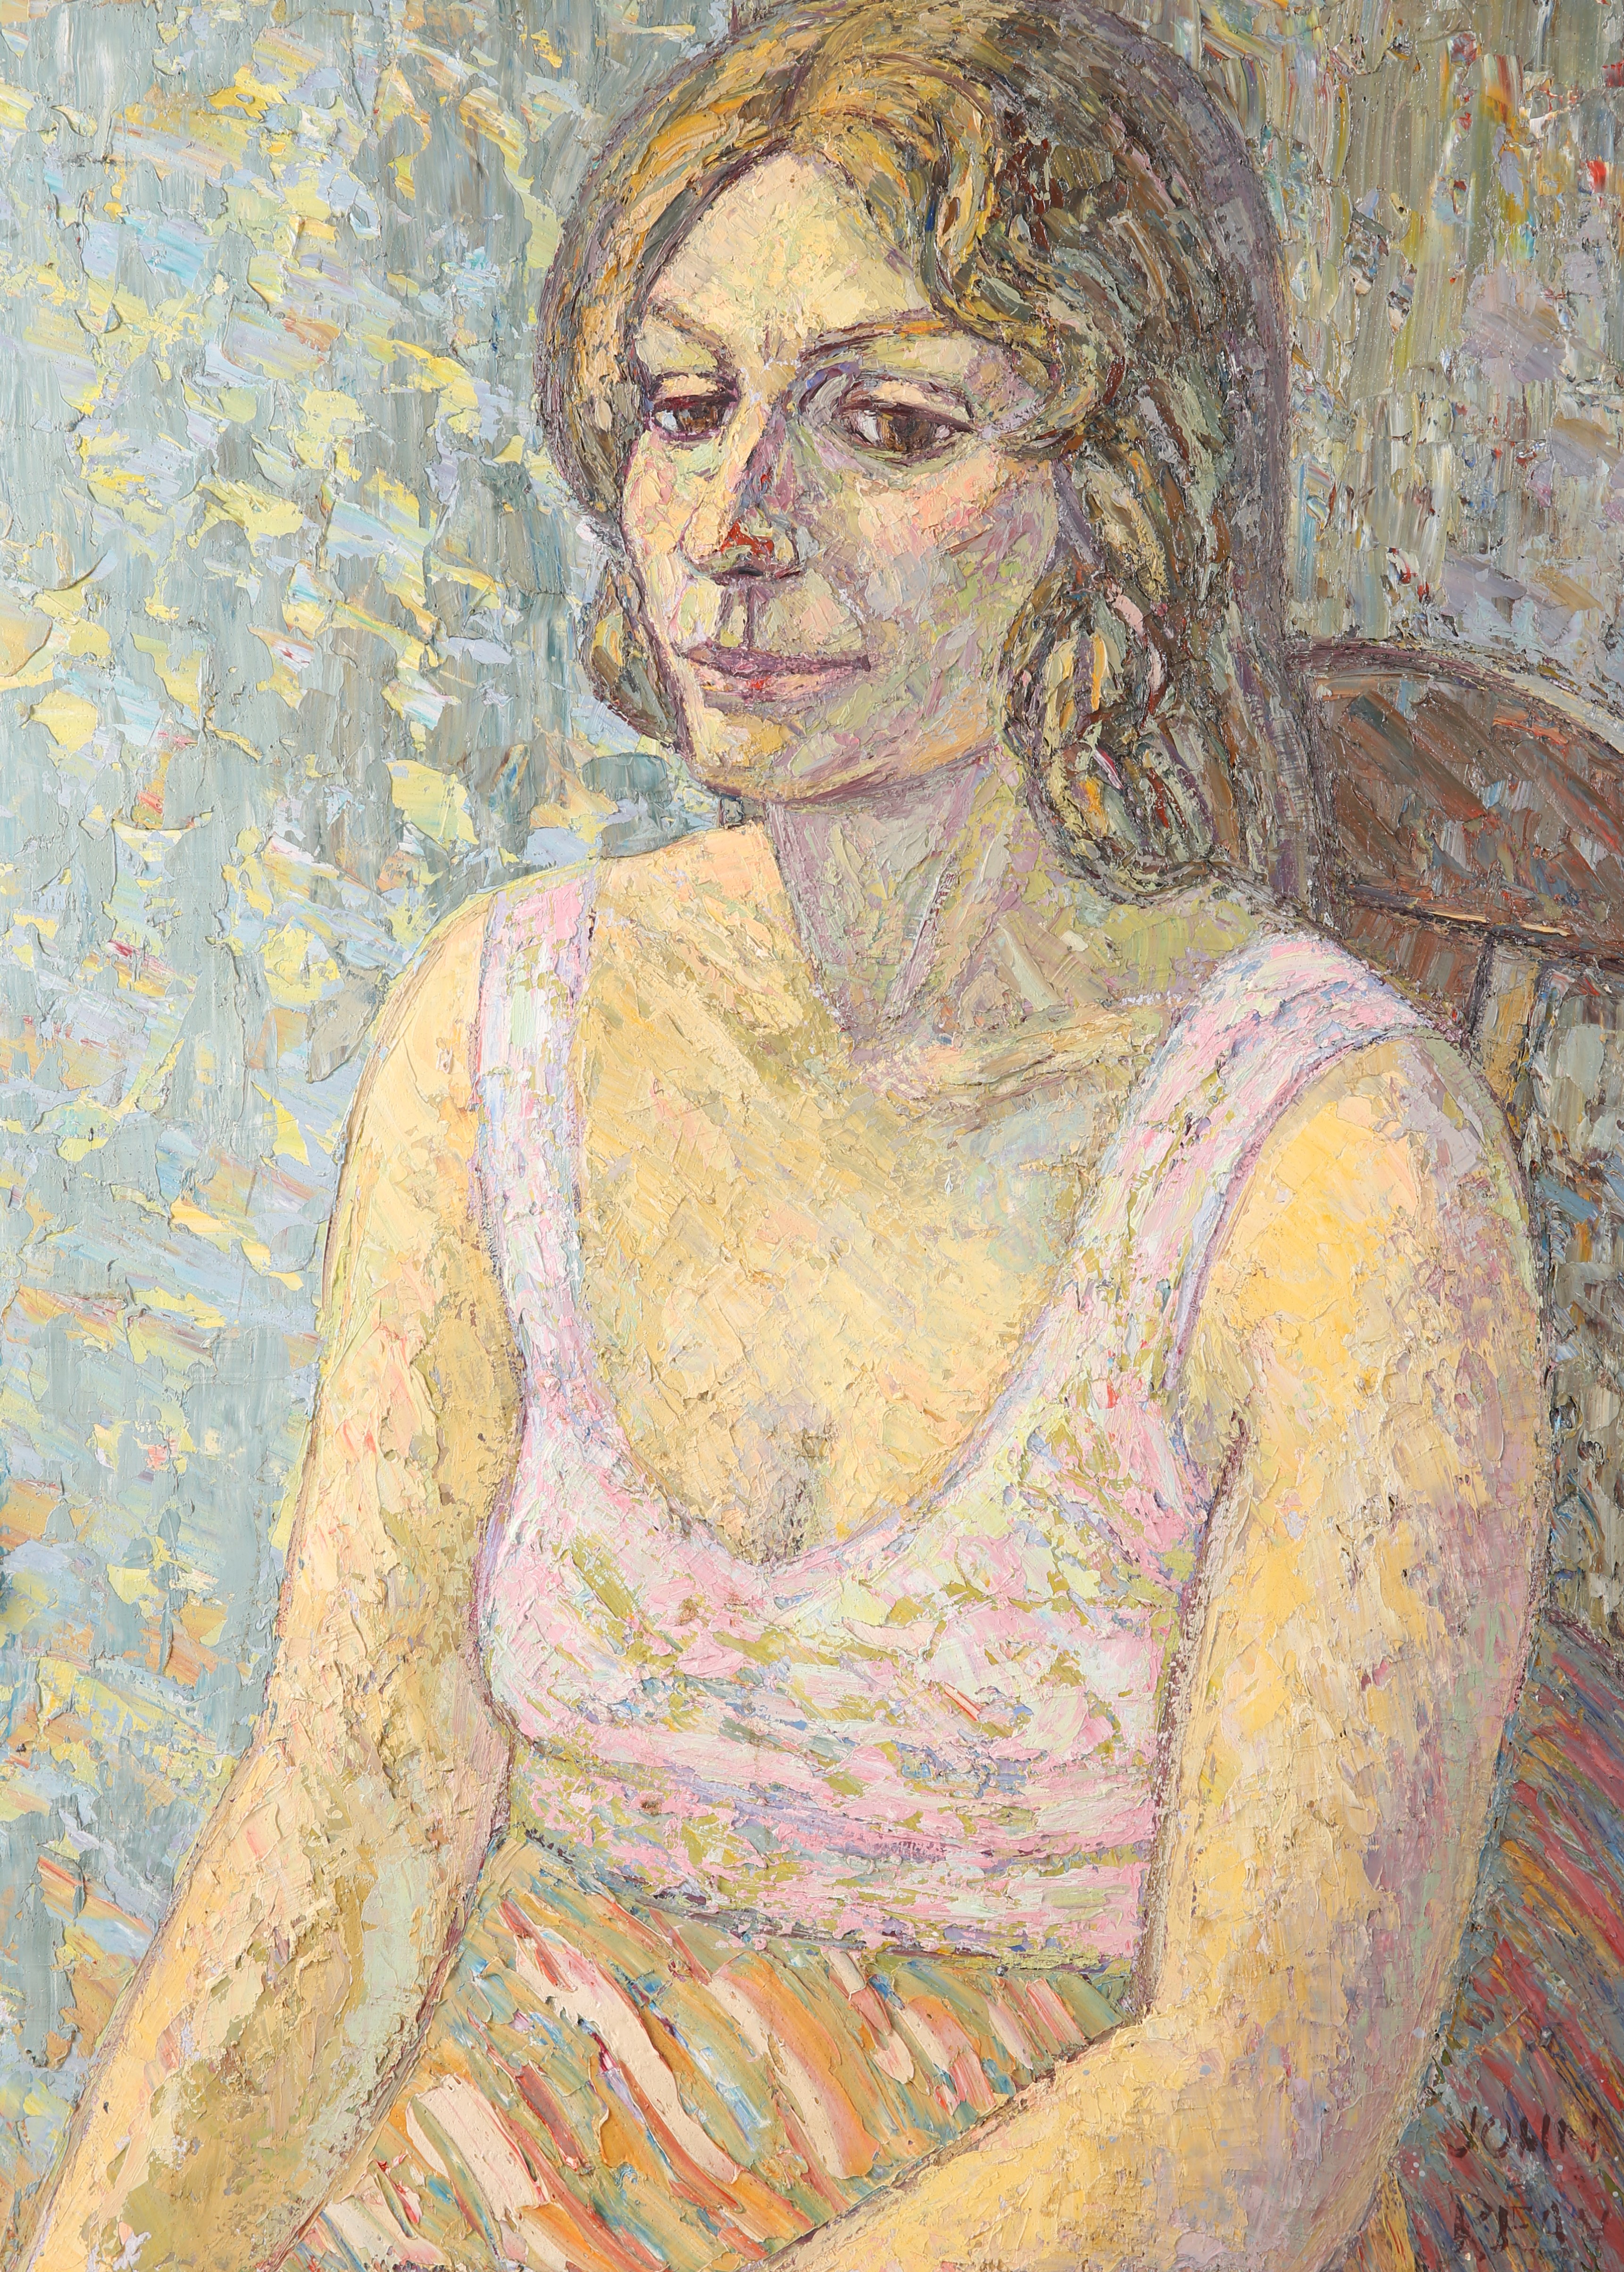 JOHN REAY, PORTRAIT OF A YOUNG LADY IN A PINK TOP